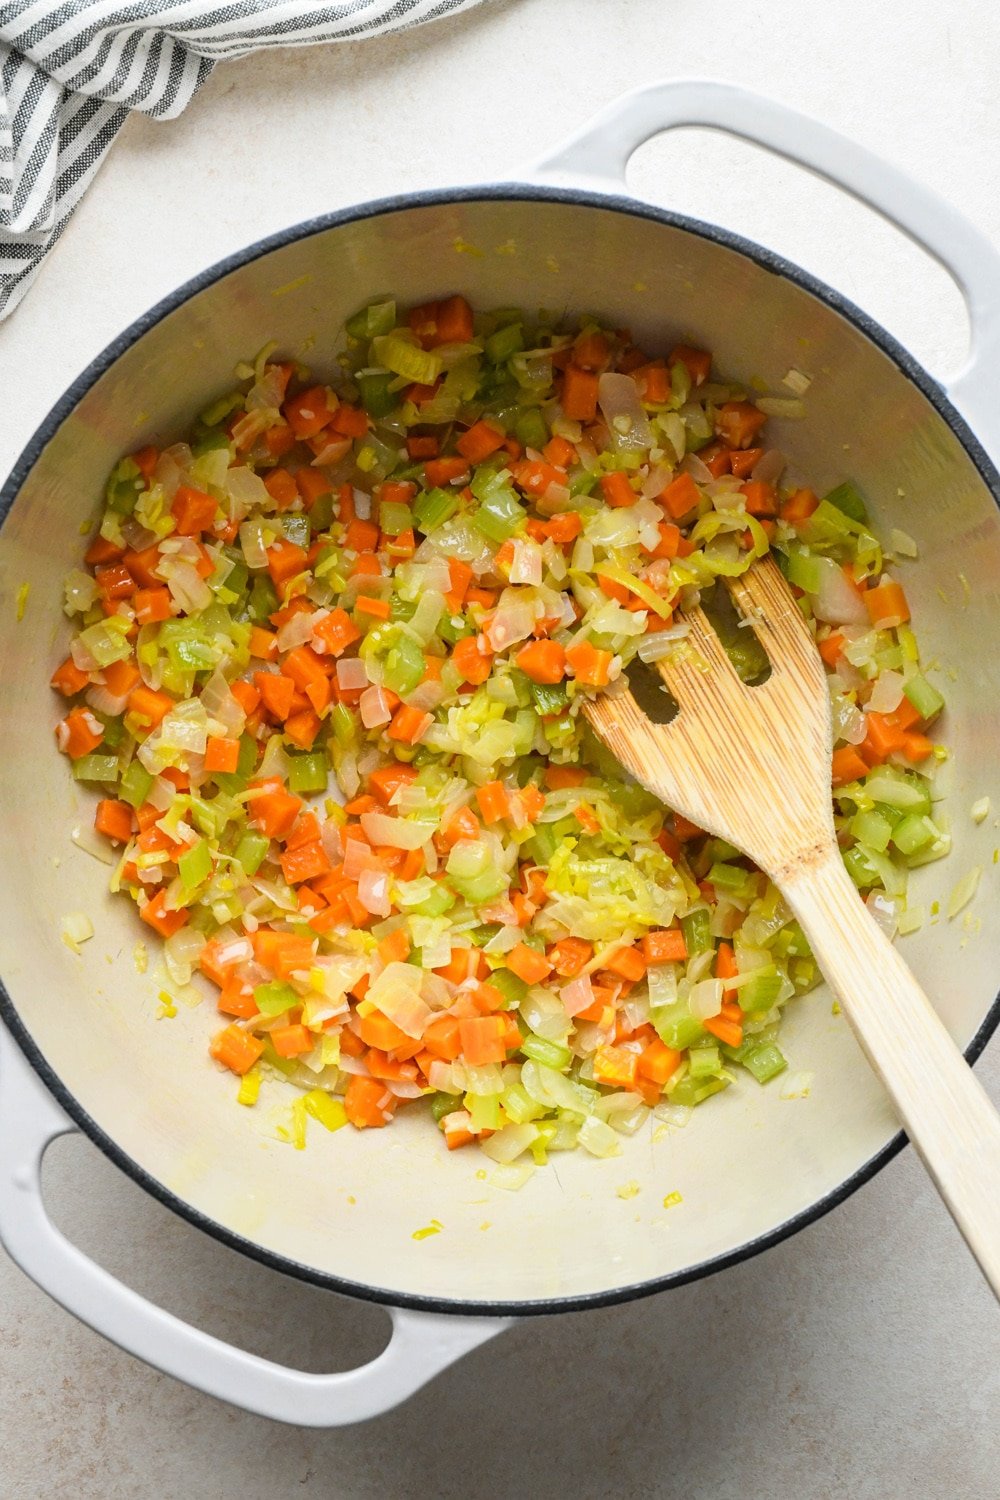 How to make Gluten Free Minestrone Soup: prepared carrots, celery, onions, and leeks in a large soup pot with olive oil after sautéing. 